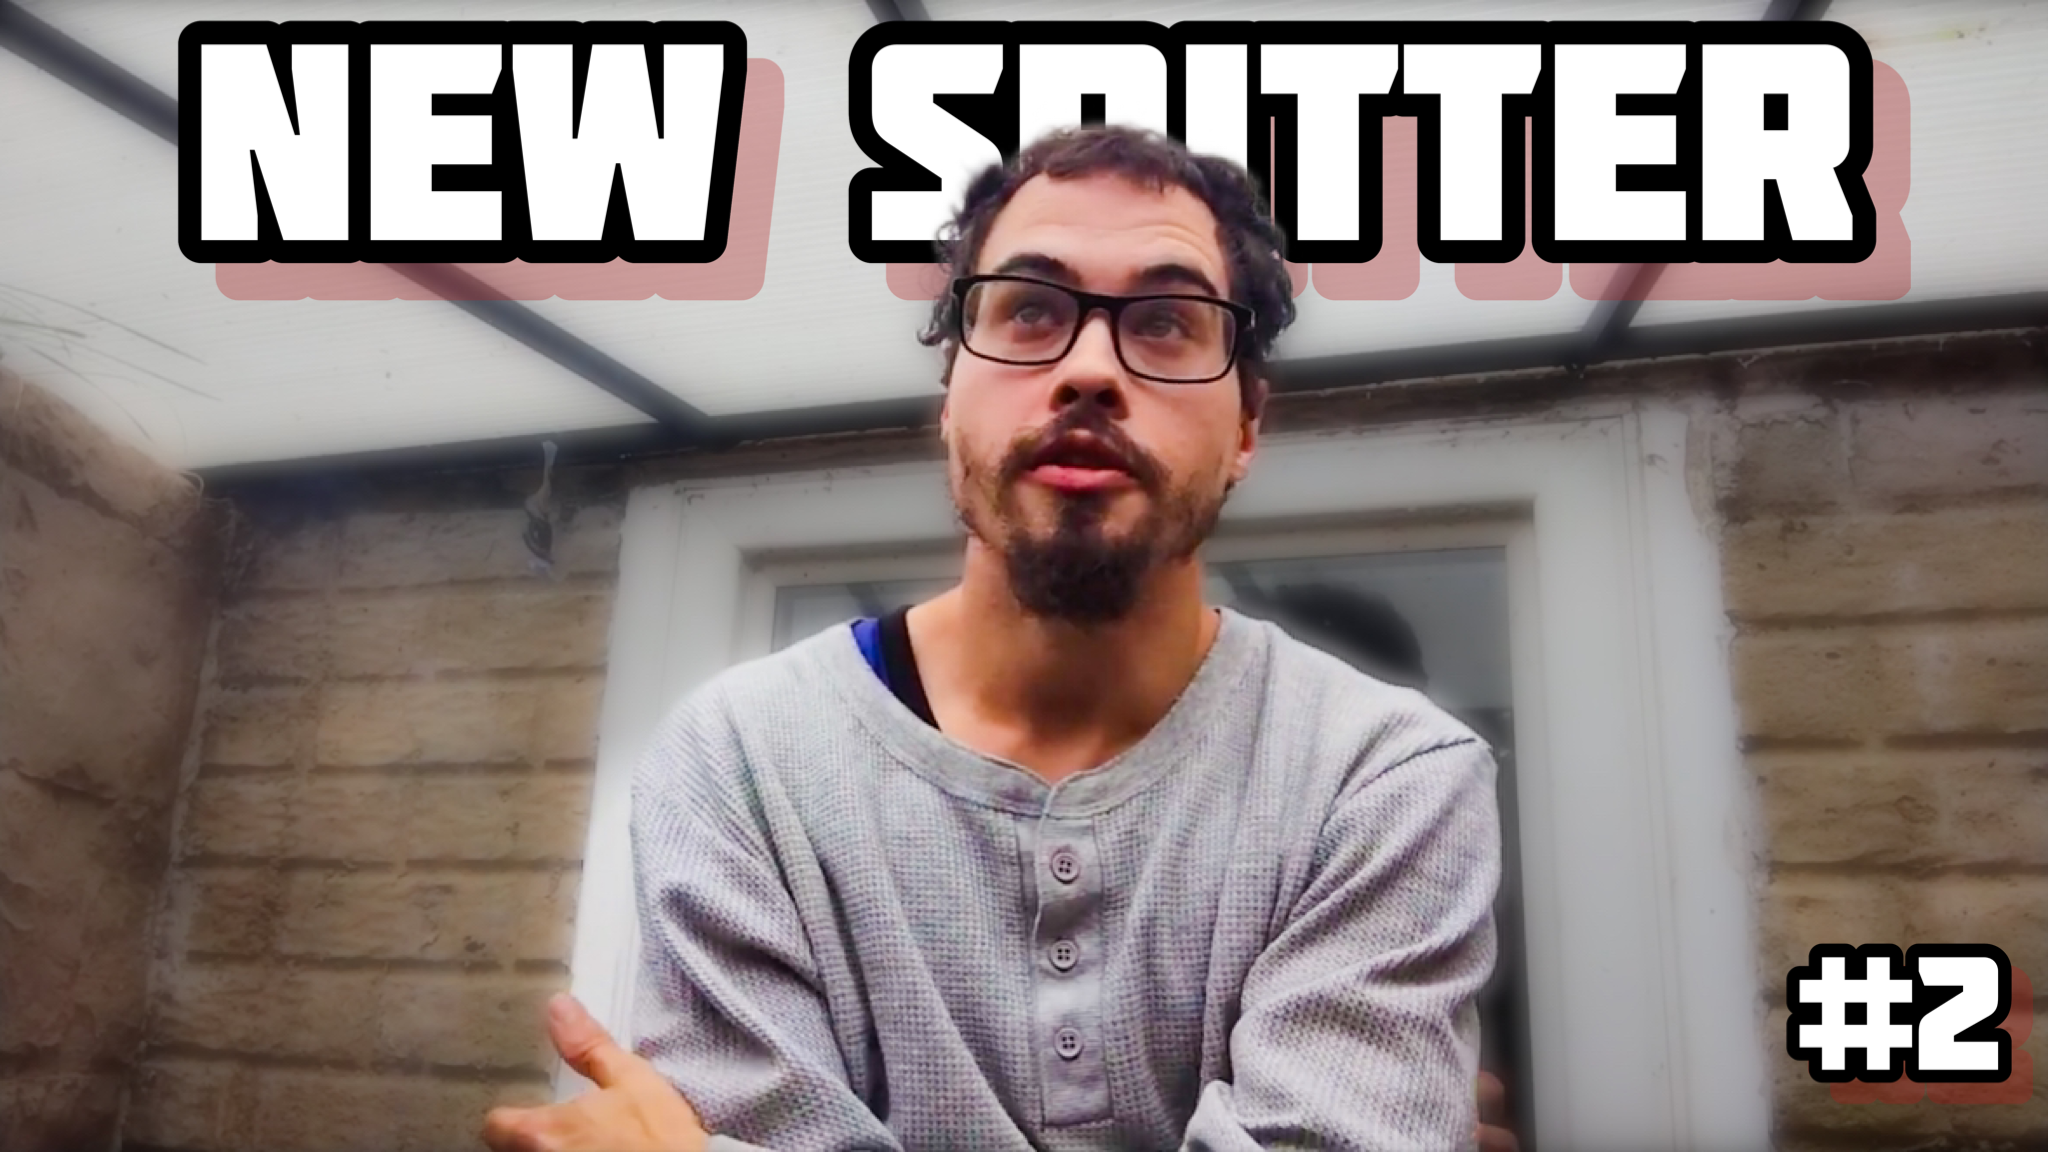 The New Spitter In Town 2 (teaser)